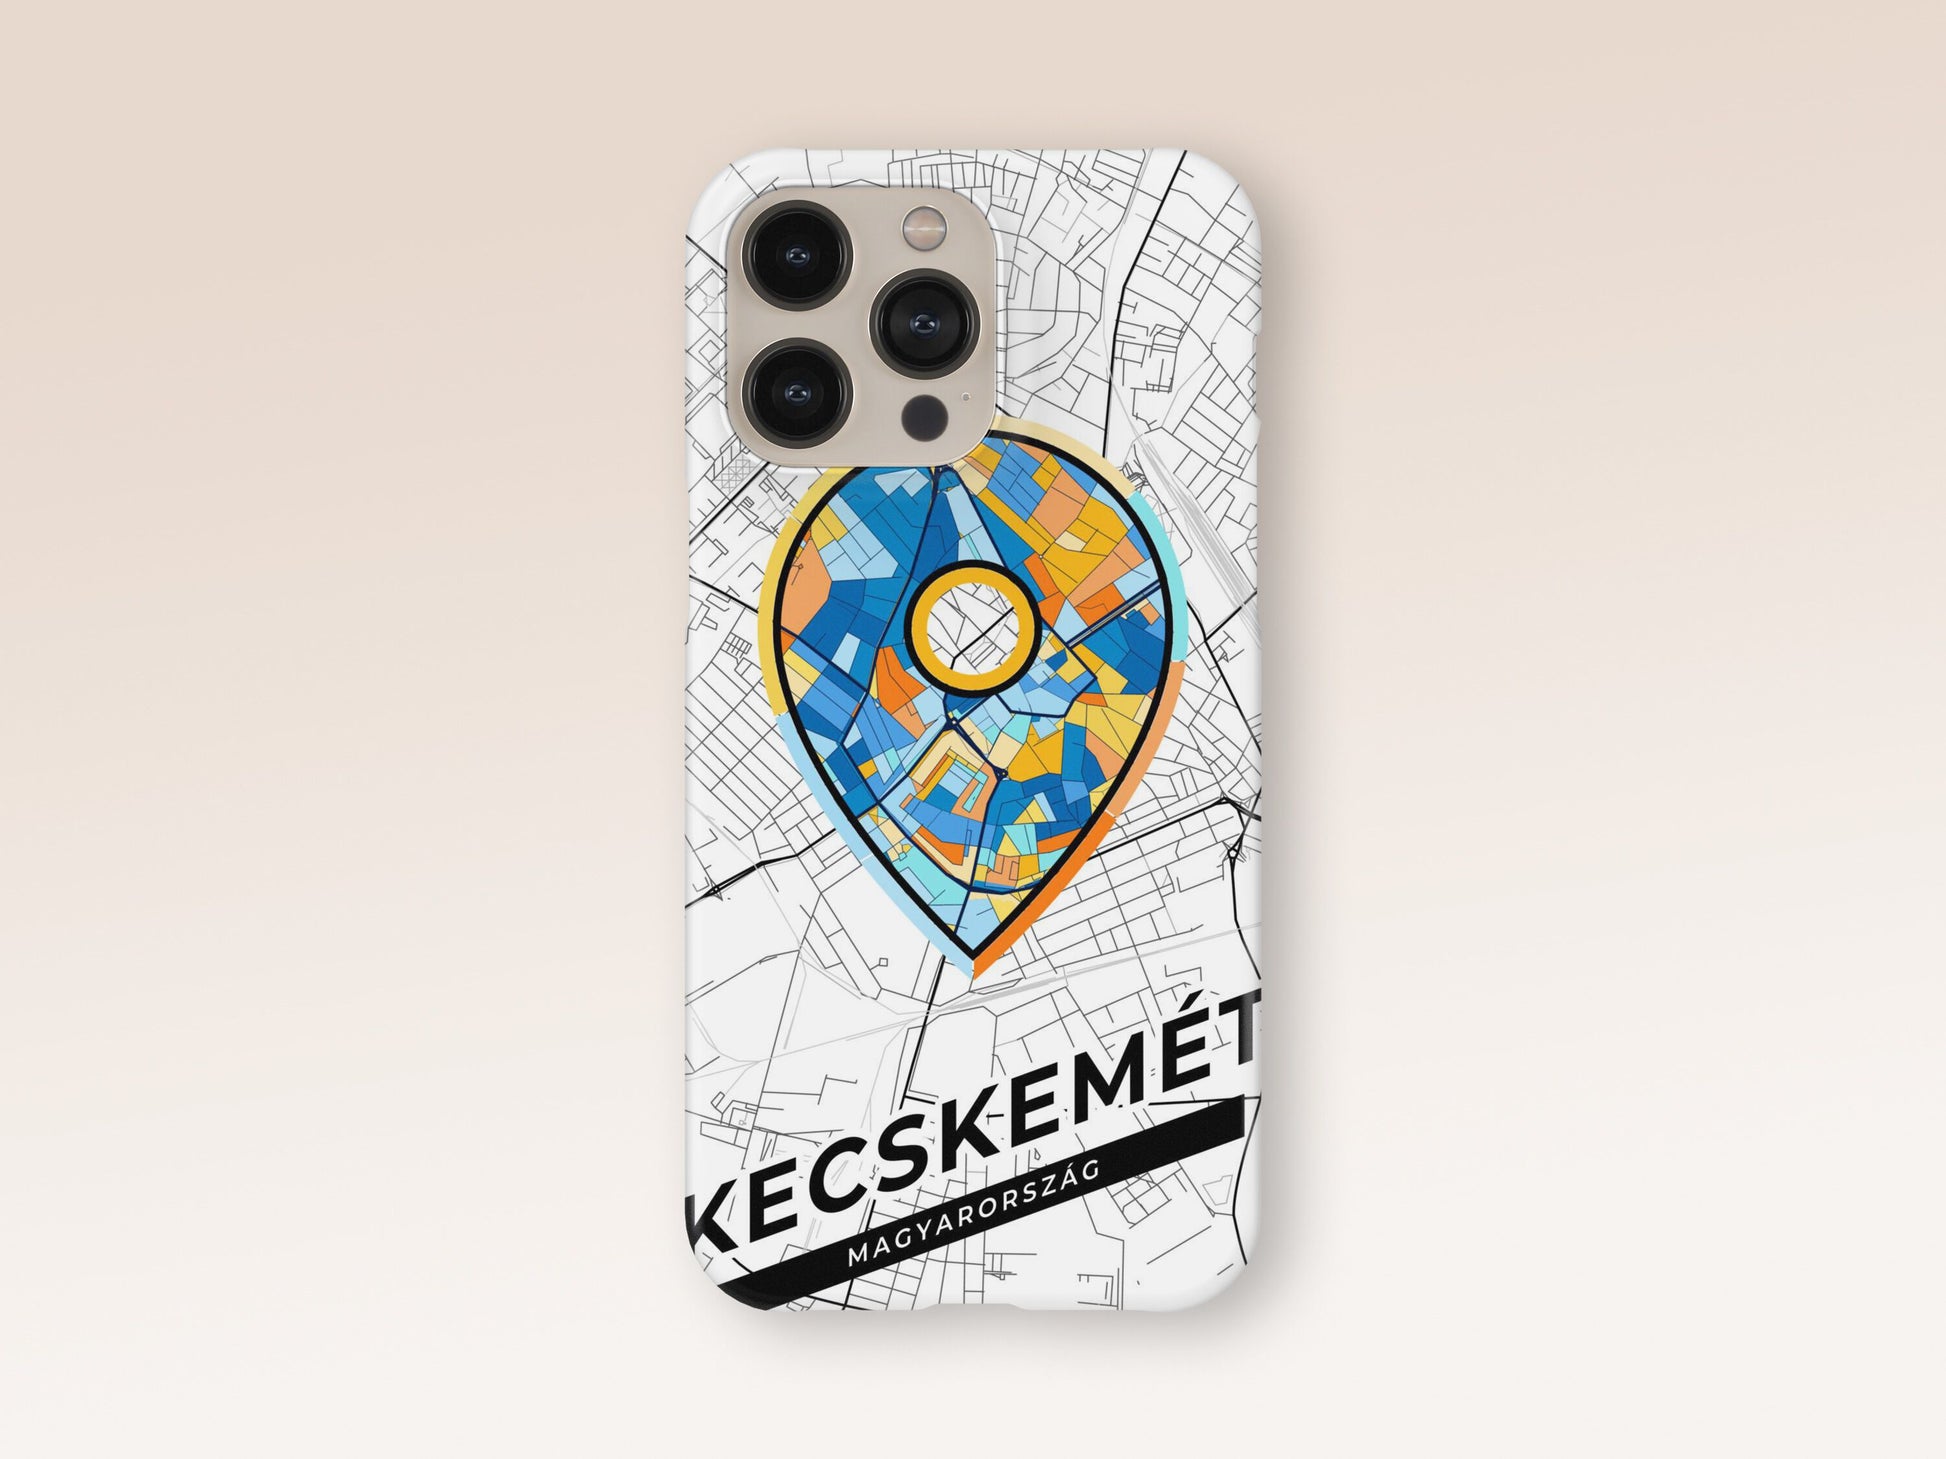 Kecskemét Hungary slim phone case with colorful icon. Birthday, wedding or housewarming gift. Couple match cases. 1